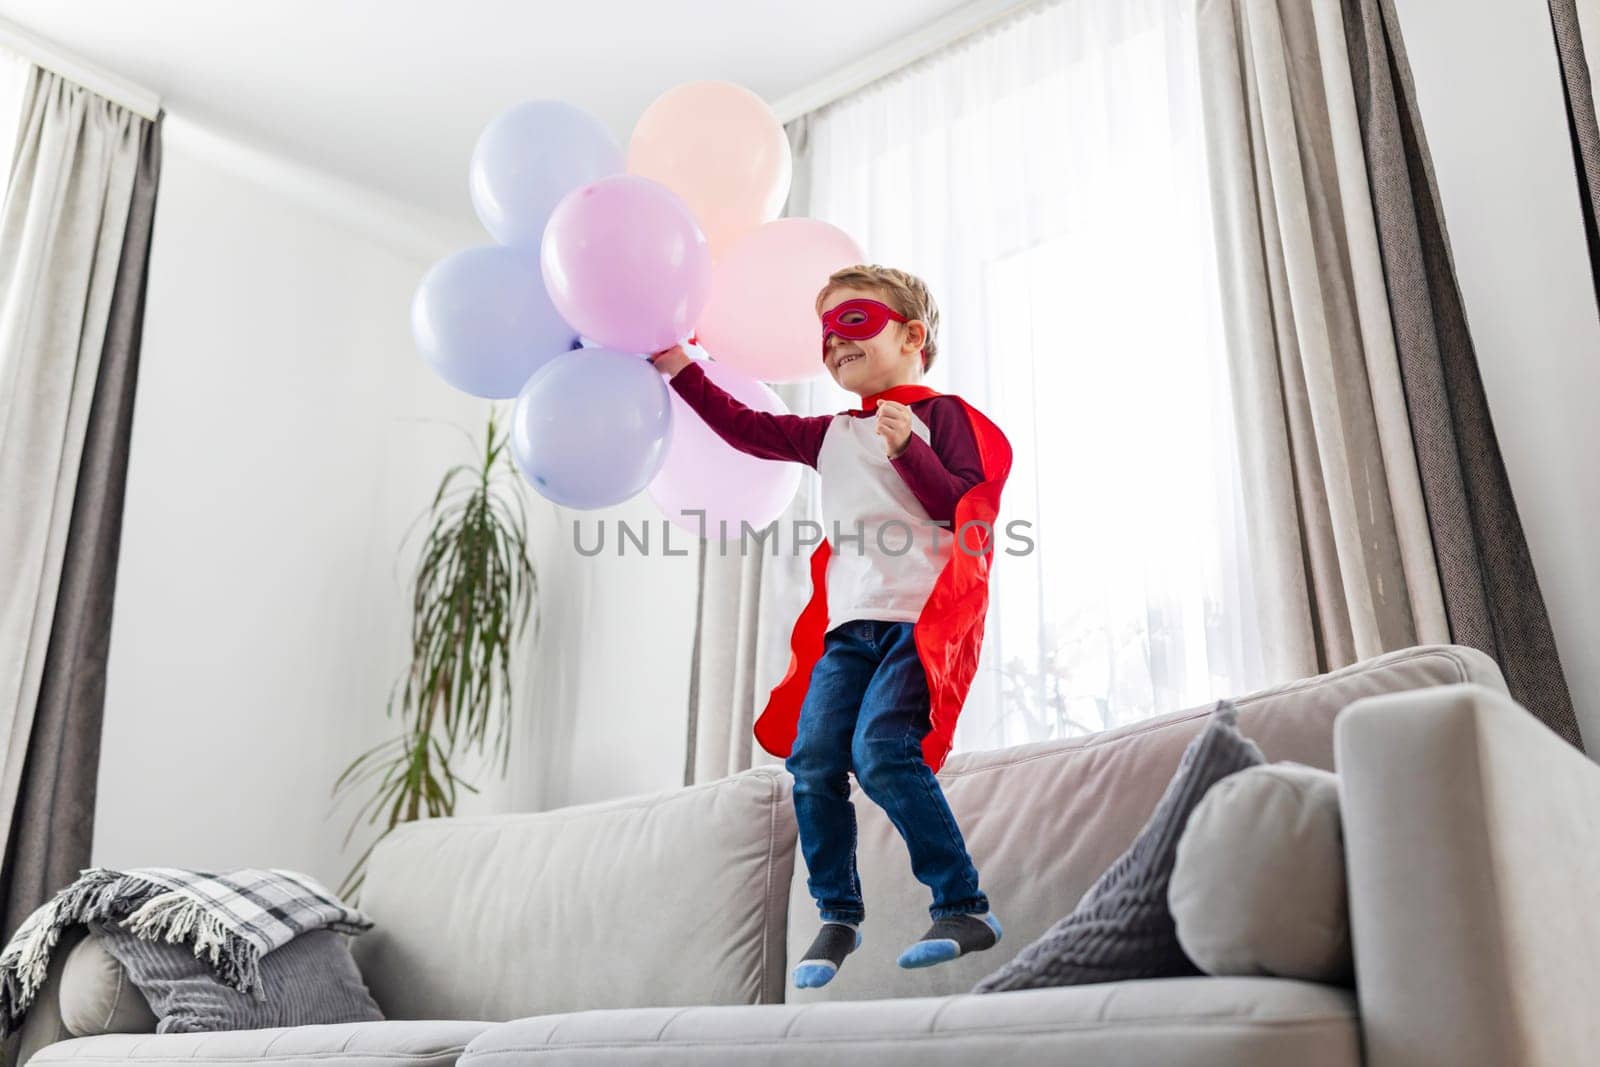 Child Superhero with Balloons Jumping on Sofa by andreyz